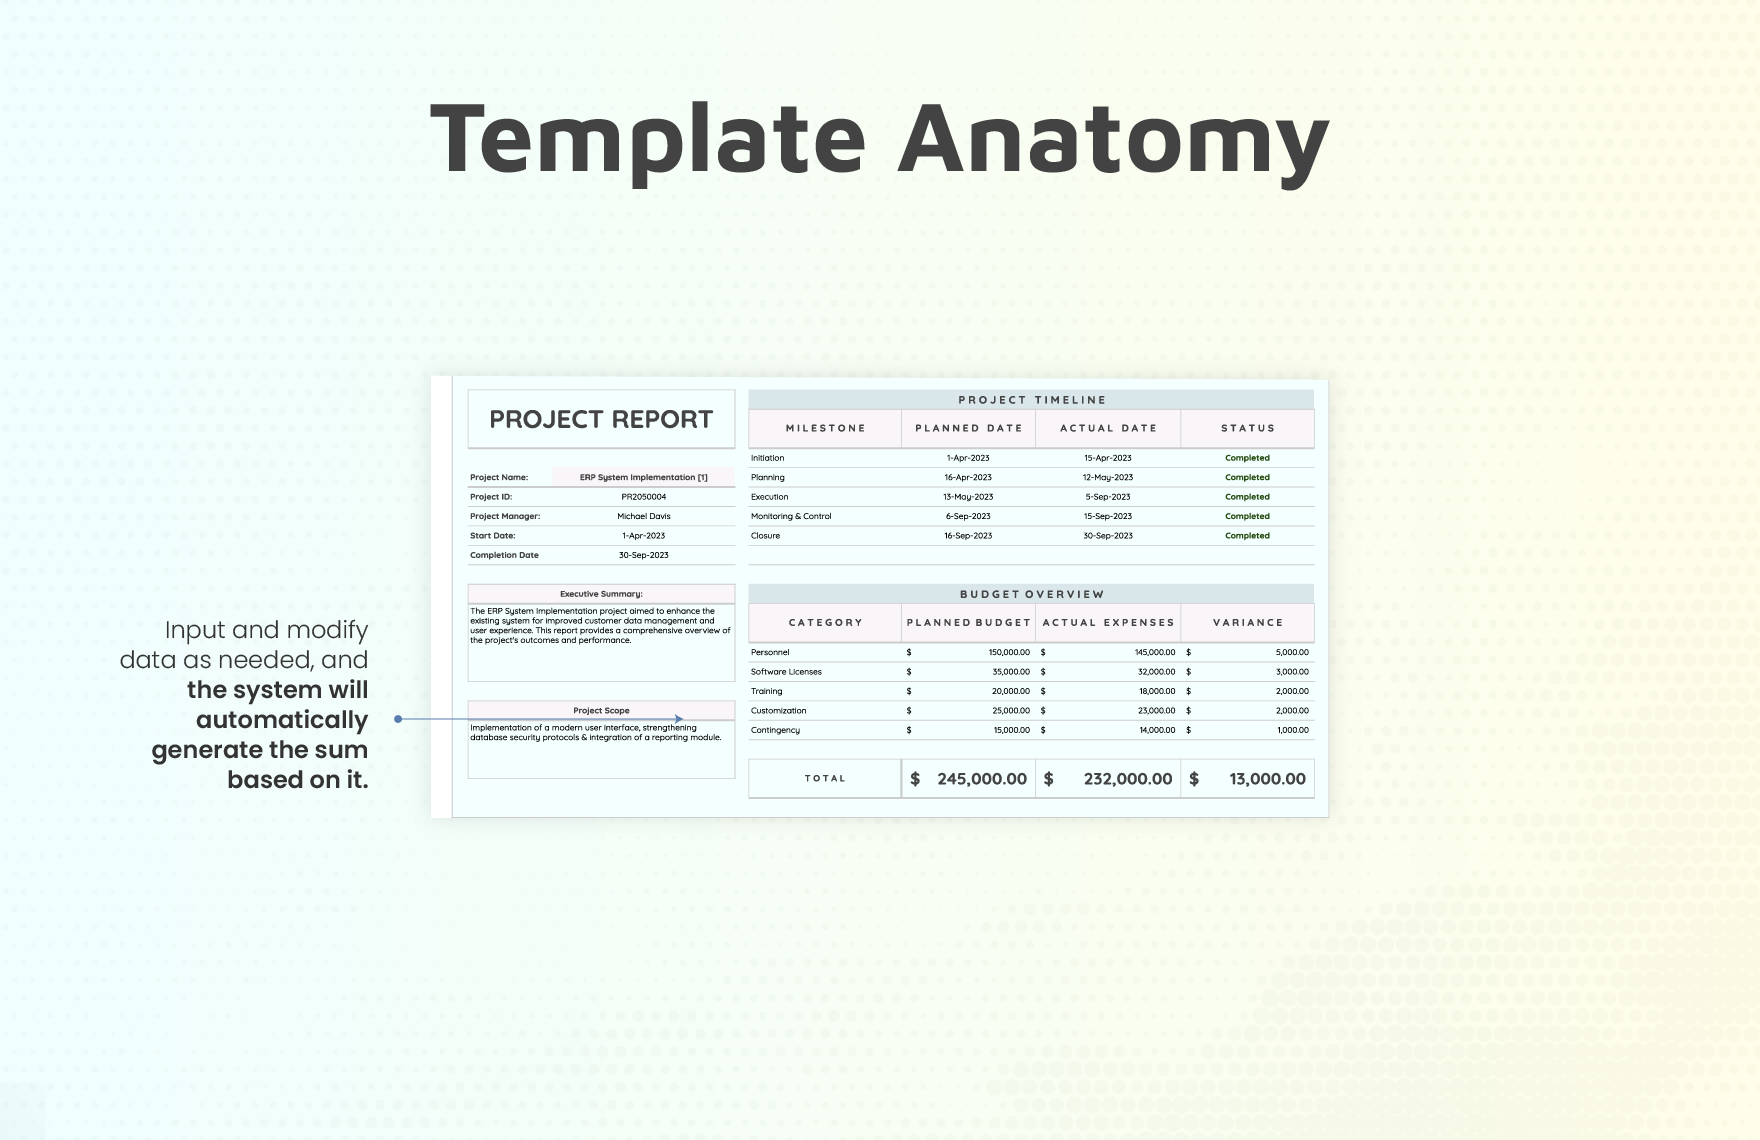 Project Completion Report Template